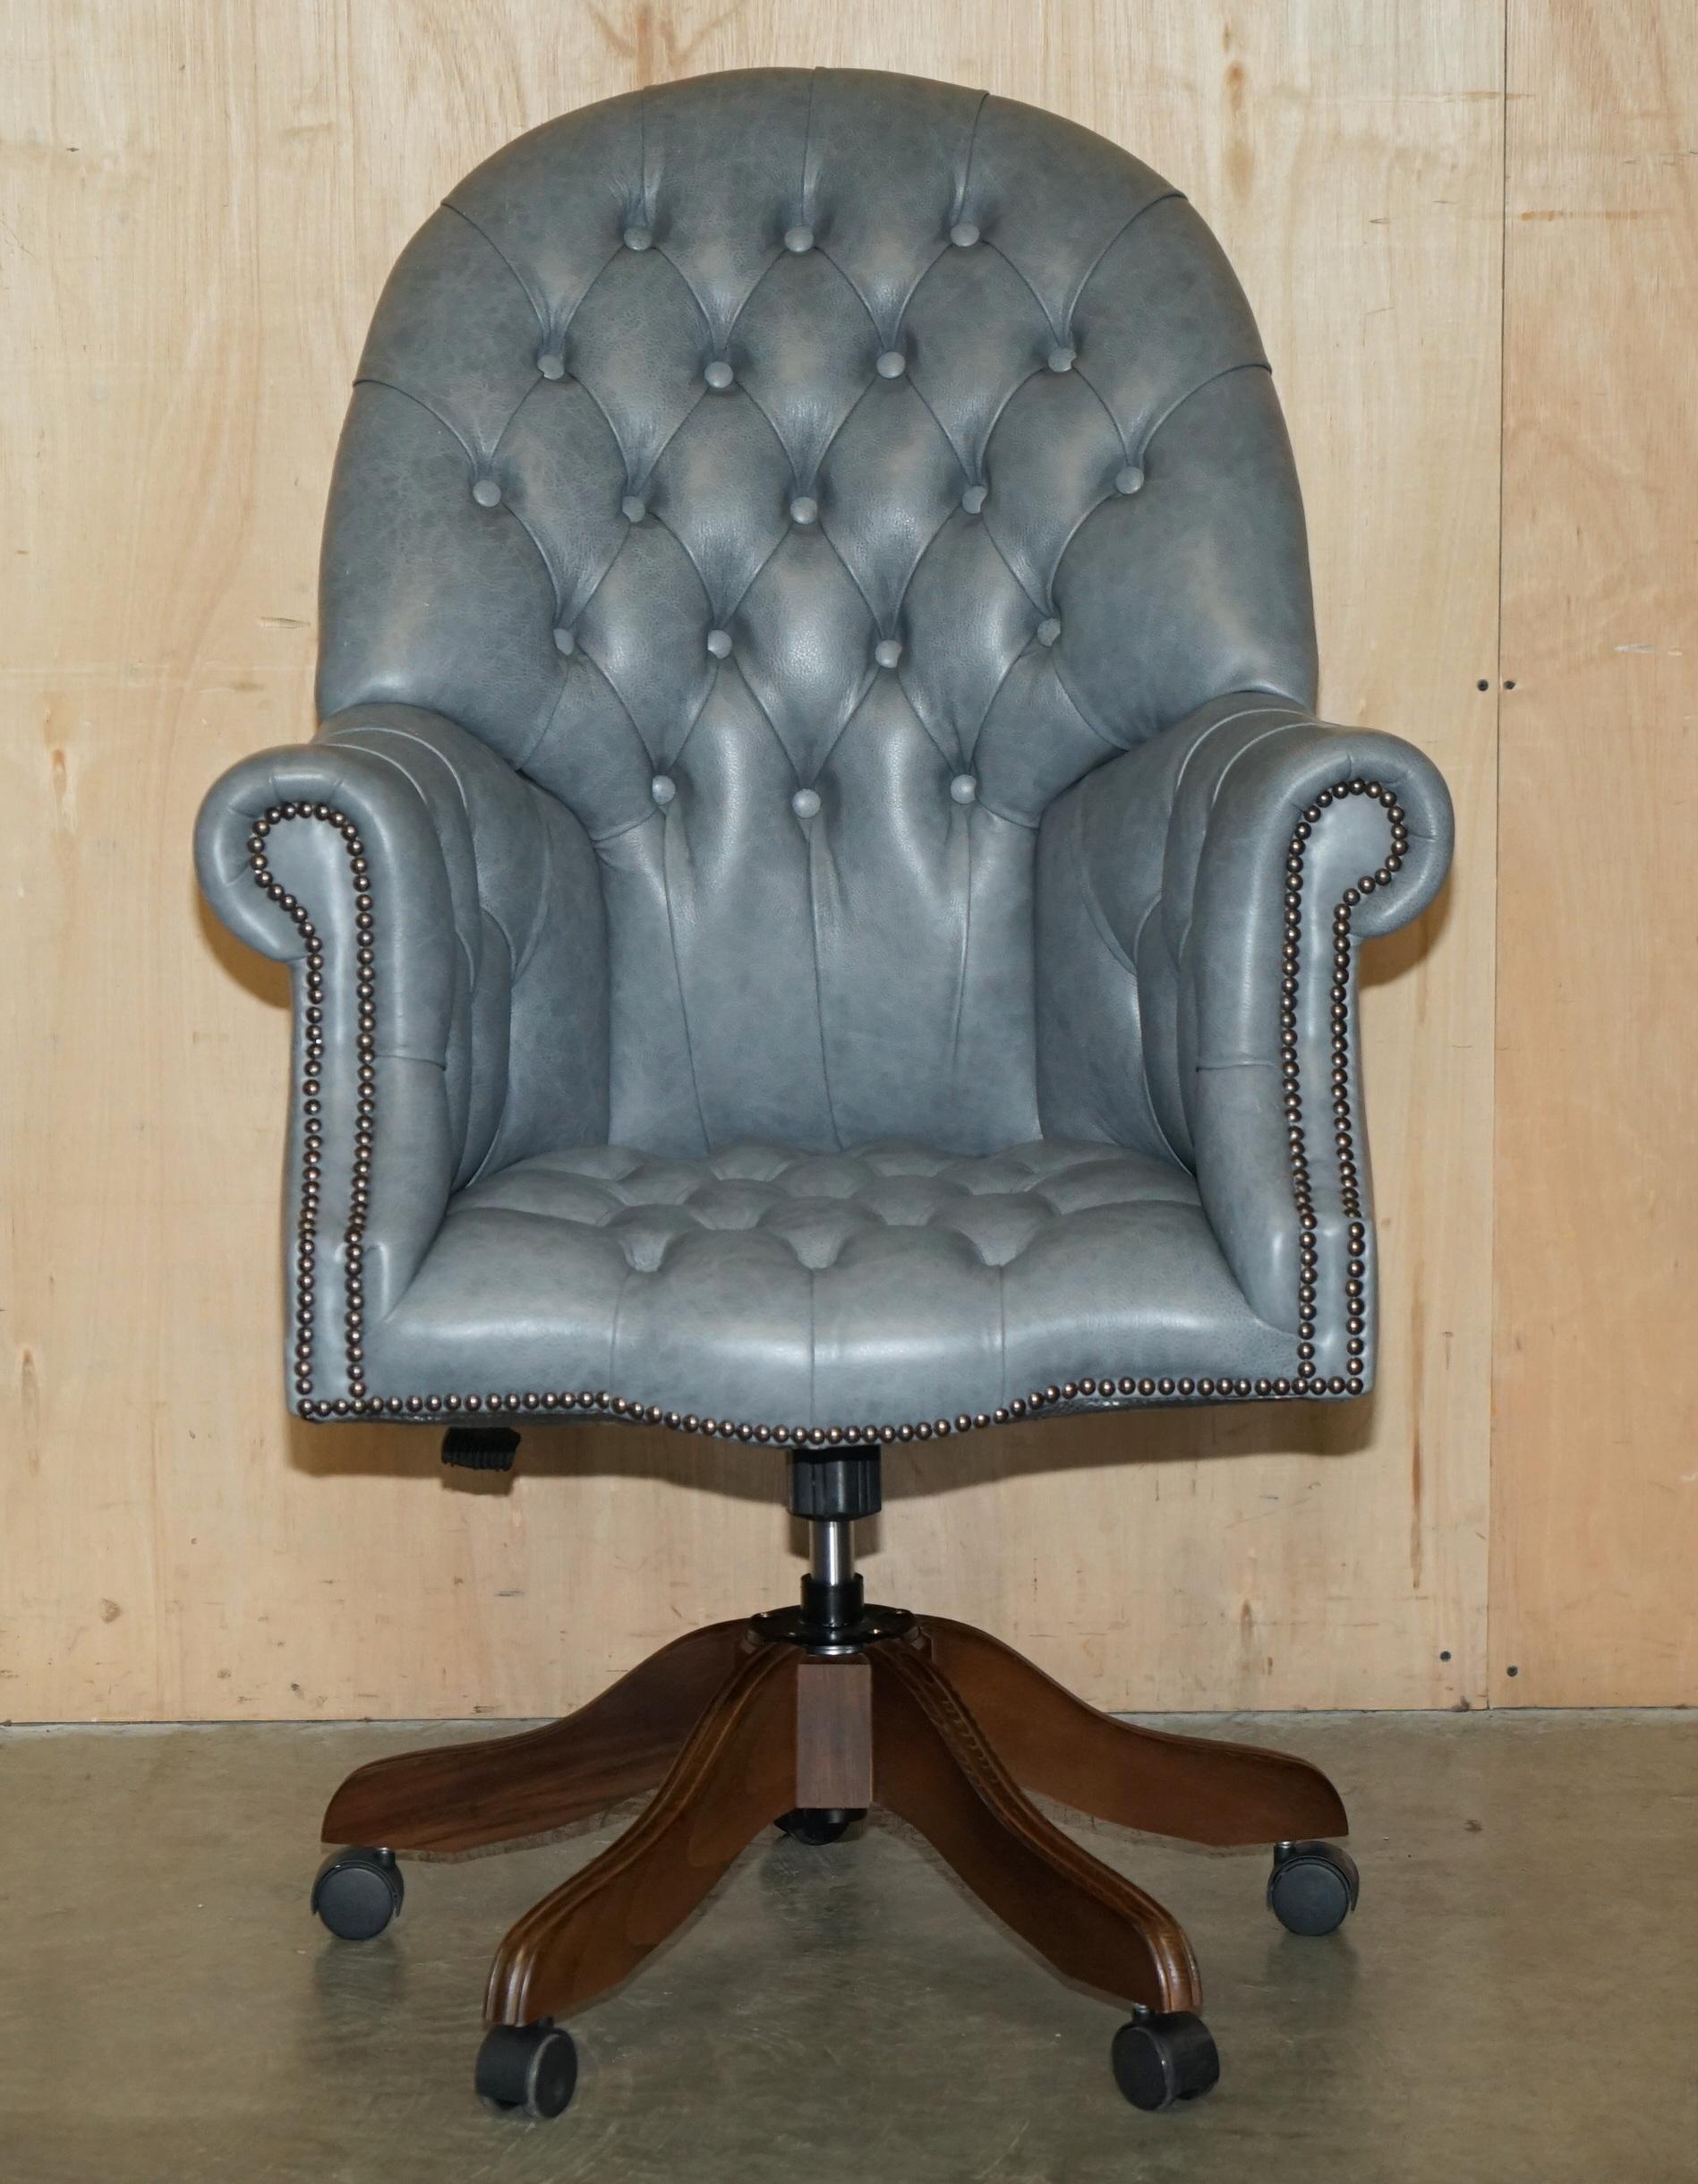 Royal House Antiques

Royal House Antiques is delighted to offer for sale this stunning hand made in England Regency Blue Chesterfield tufted leather office swivel armchair 

Please note the delivery fee listed is just a guide, it covers within the